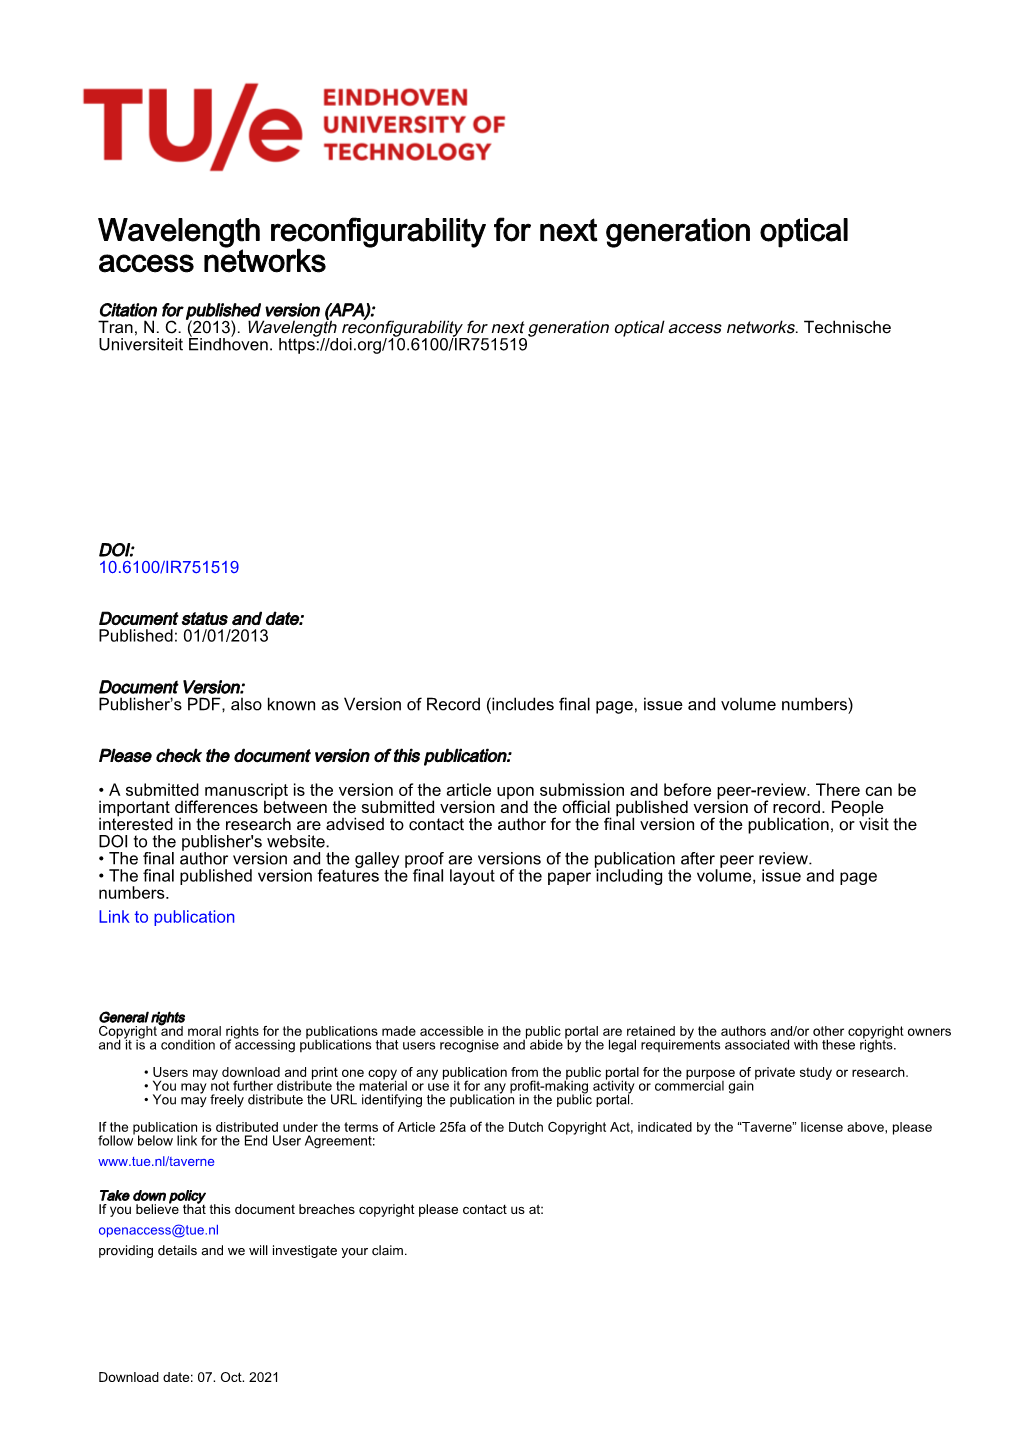 Wavelength Reconfigurability for Next Generation Optical Access Networks